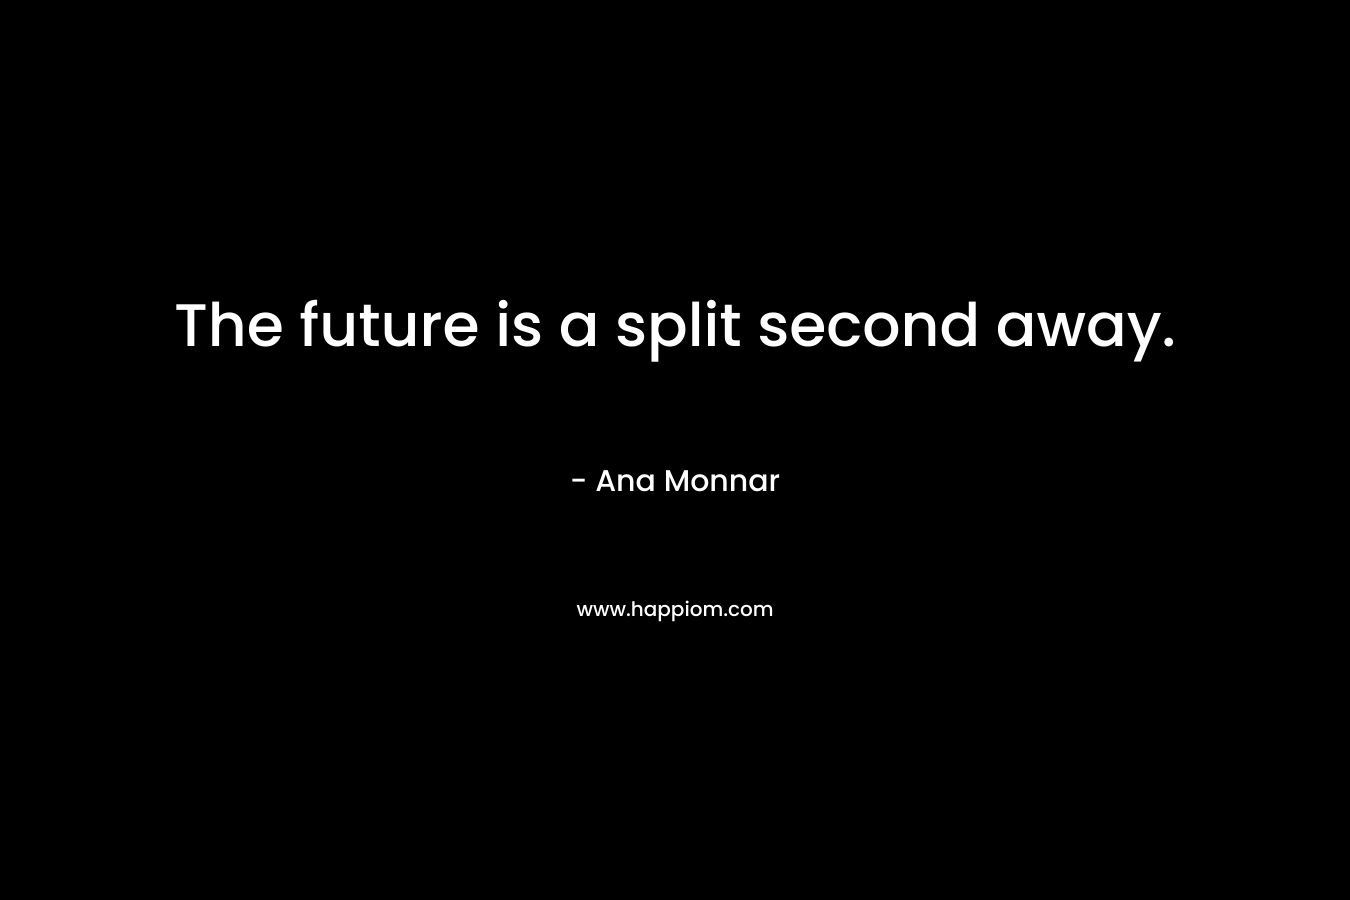 The future is a split second away.